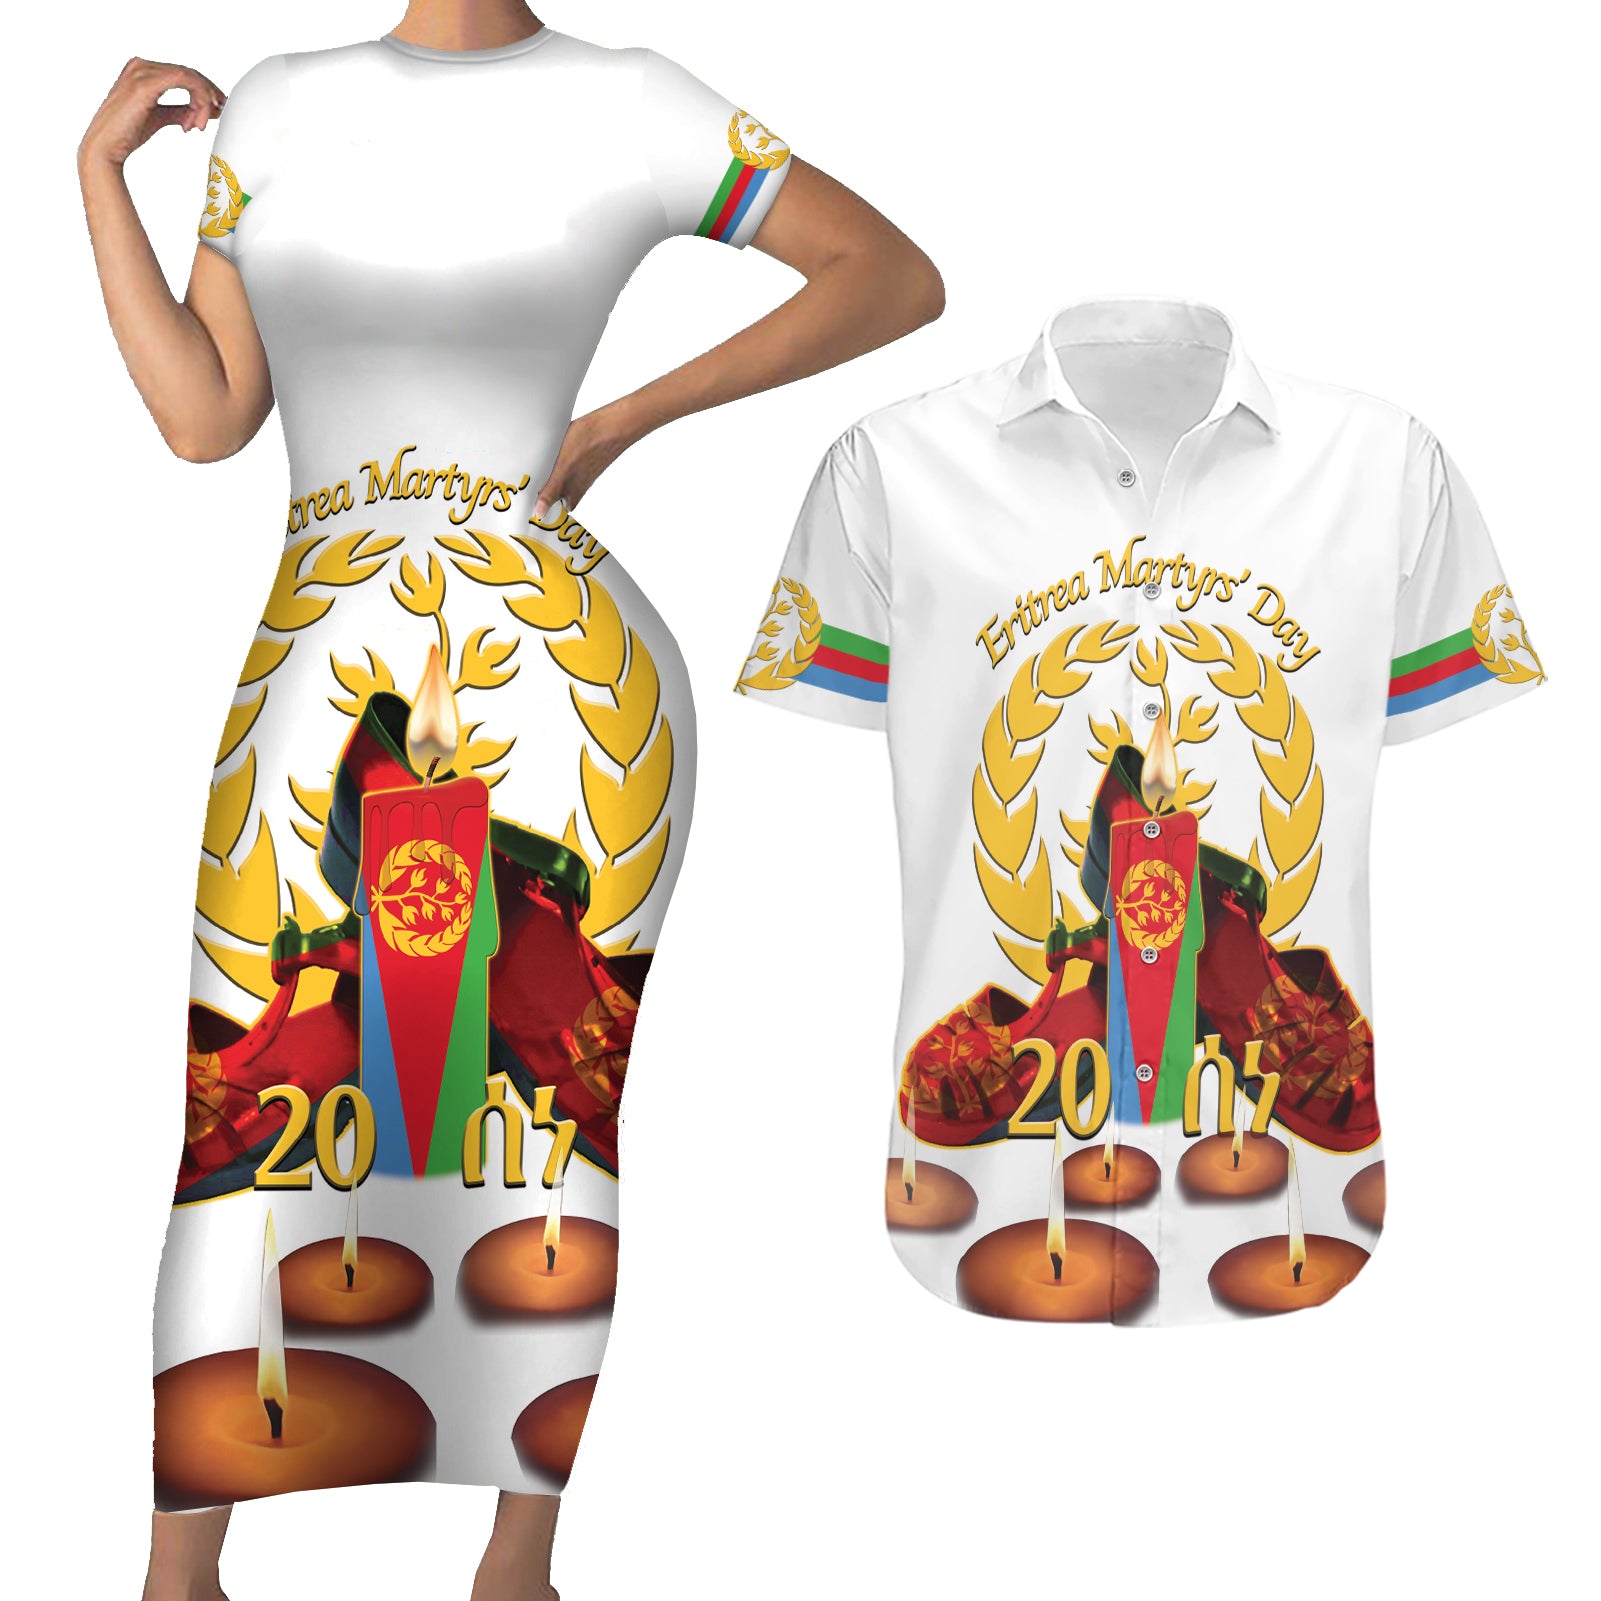 Custom Eritrea Martyrs' Day Couples Matching Short Sleeve Bodycon Dress and Hawaiian Shirt 20 June Shida Shoes With Candles - White